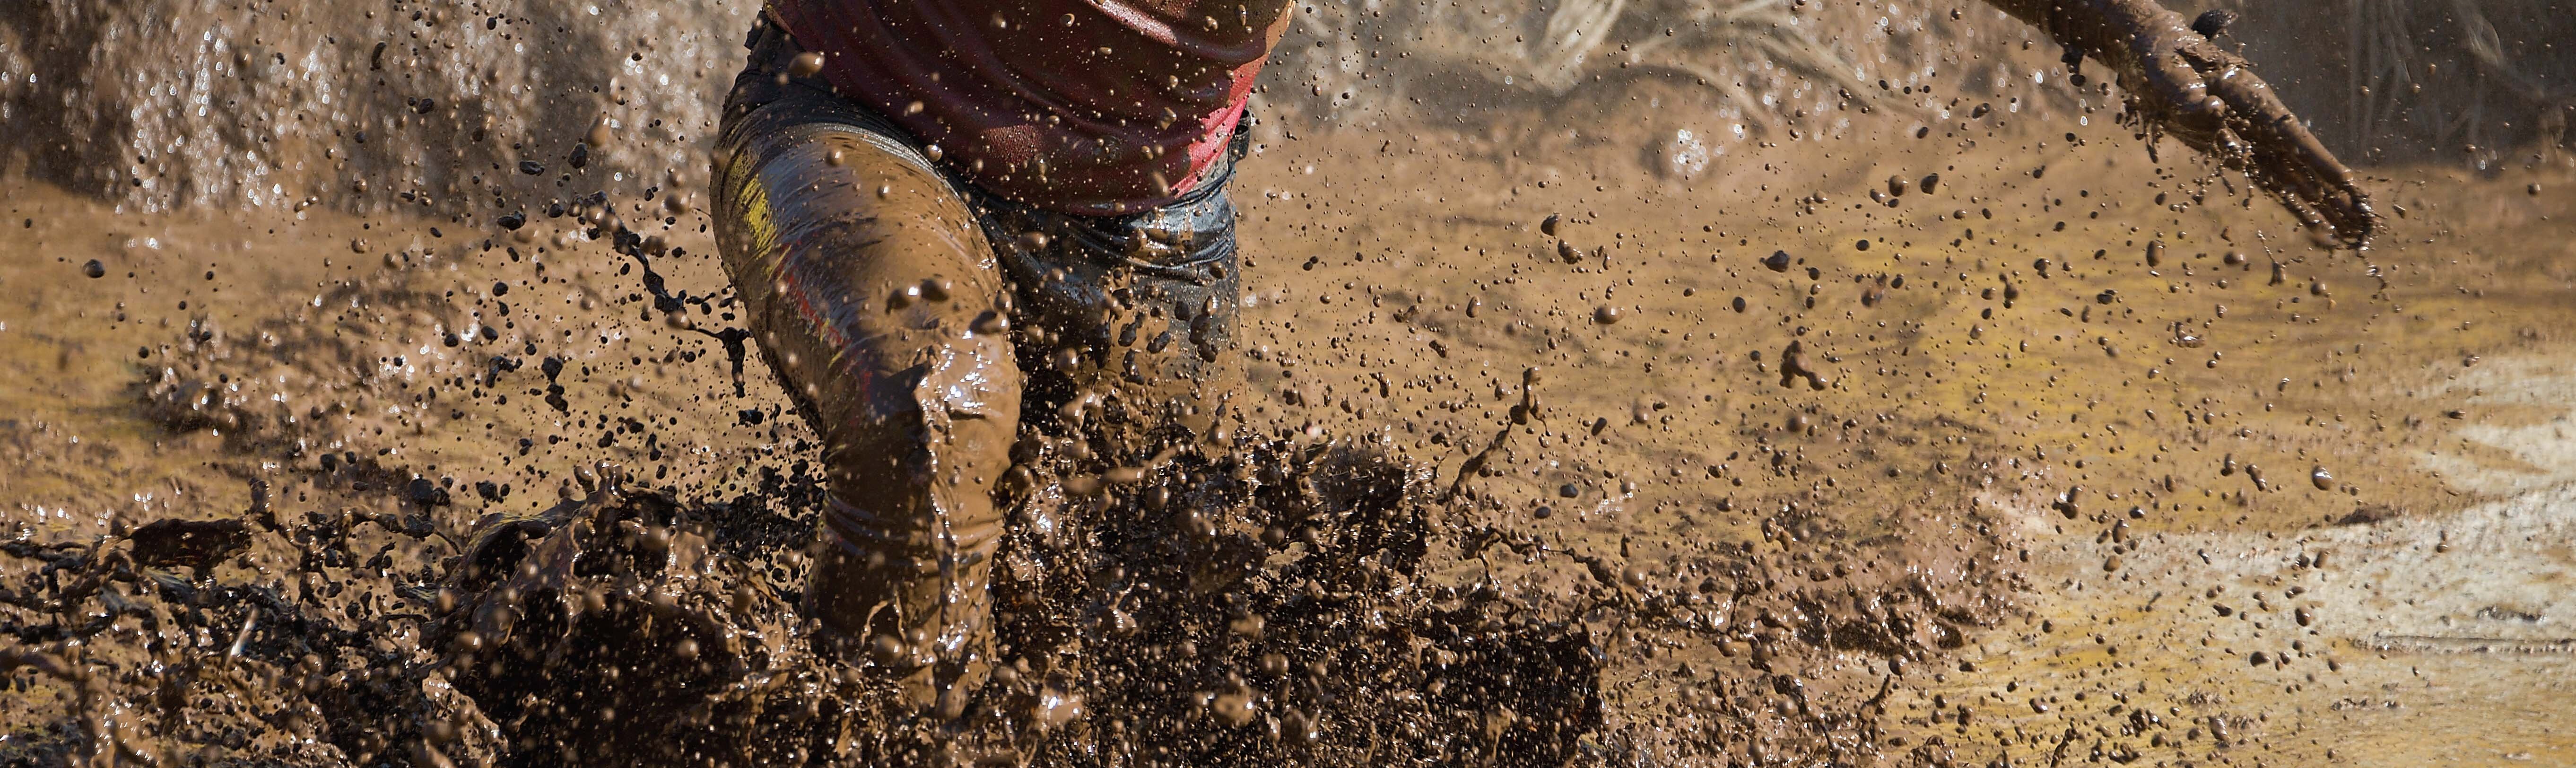 Person running in mud